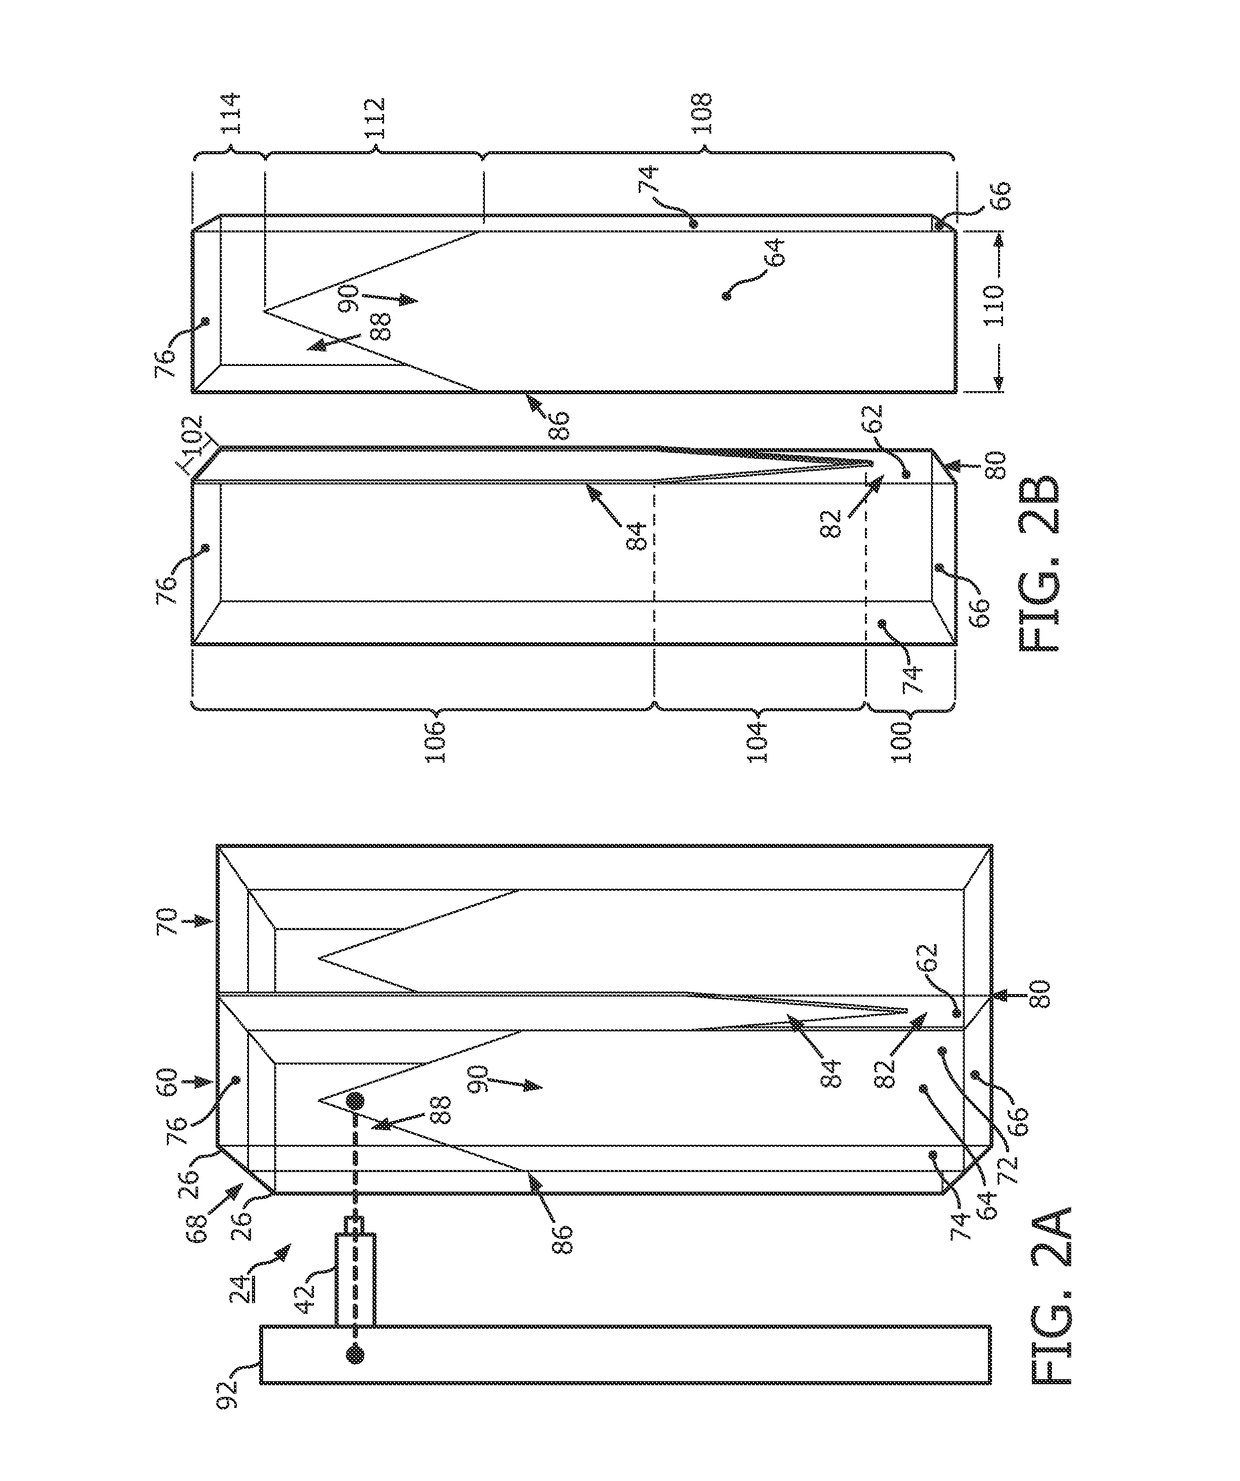 Pet detector scintillator arrangement with light sharing and depth of interaction estimation